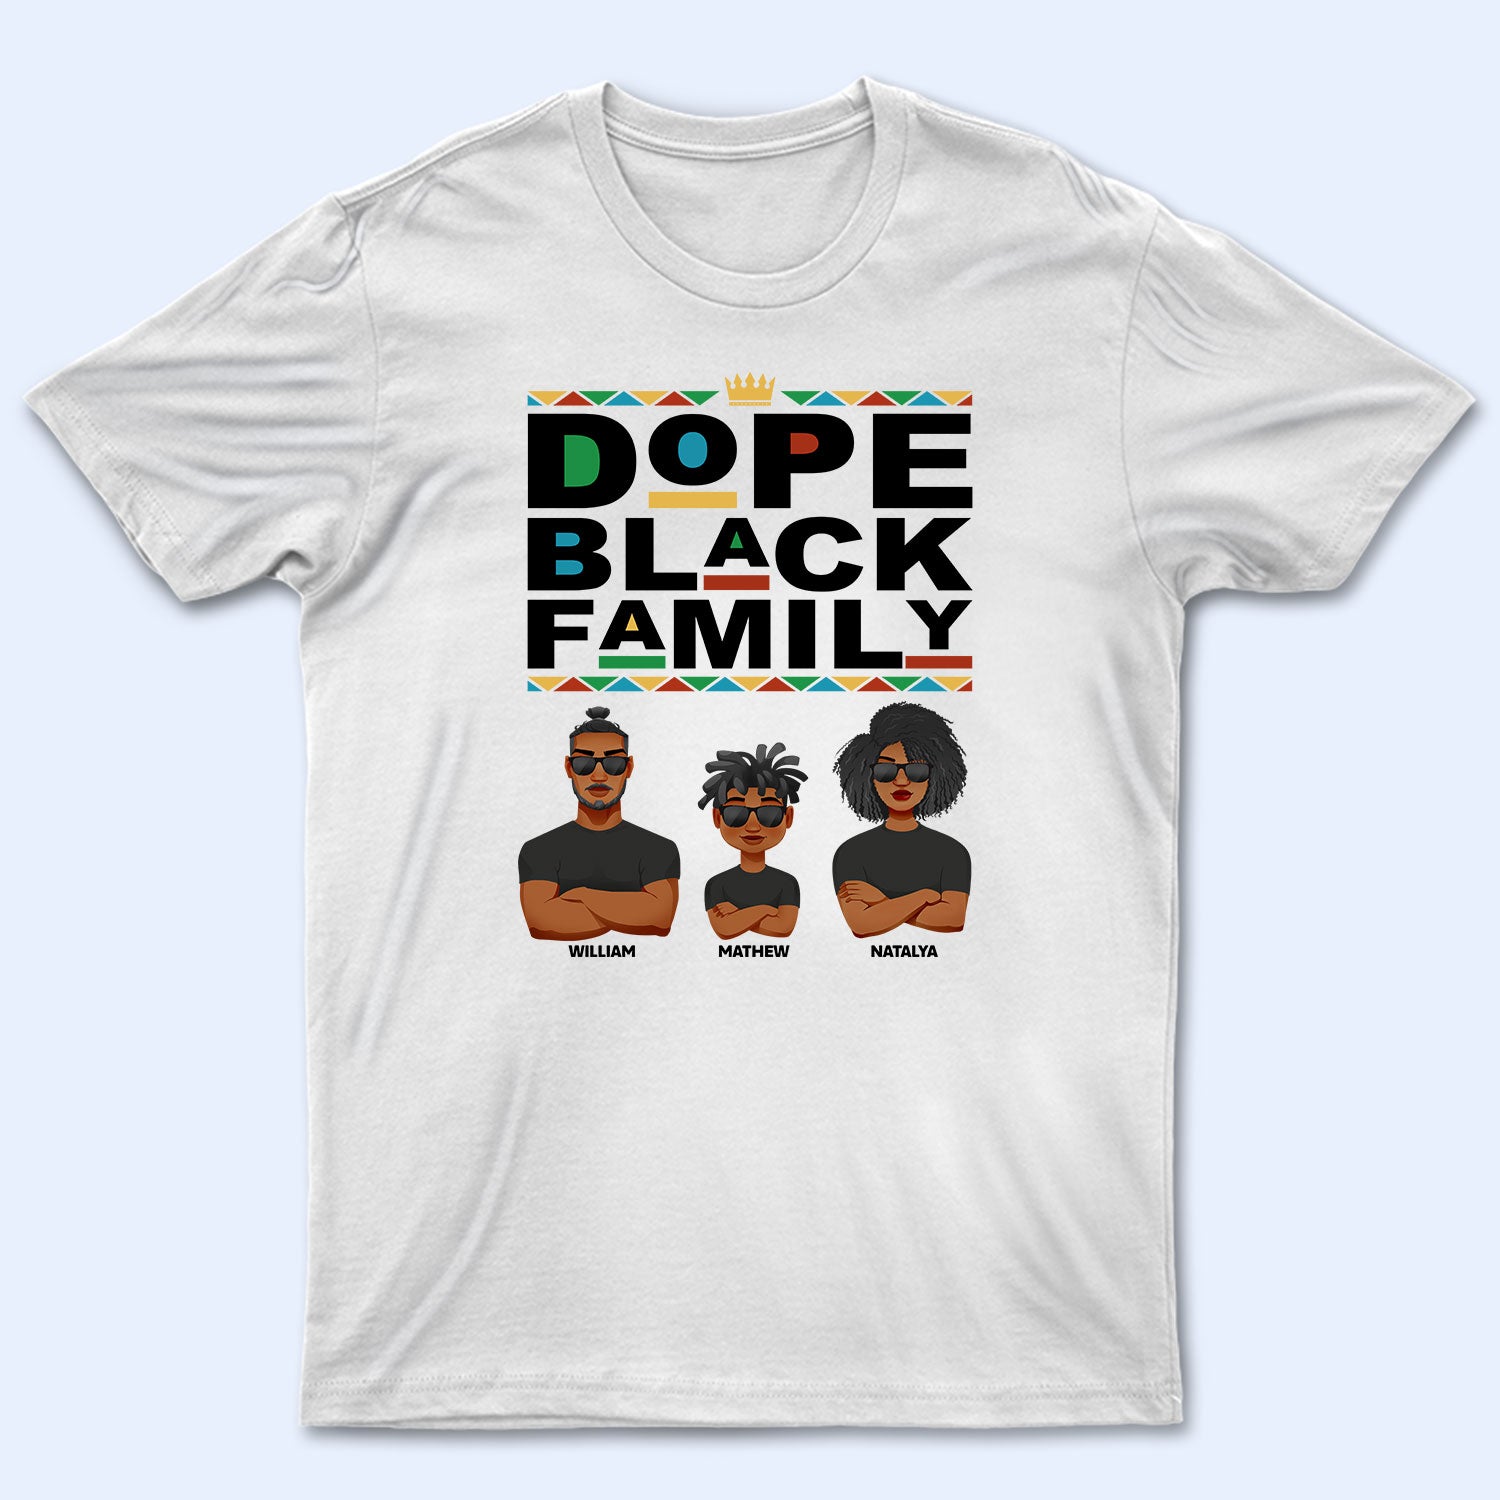 Dope Black Family - Gift For Family - Personalized T Shirt